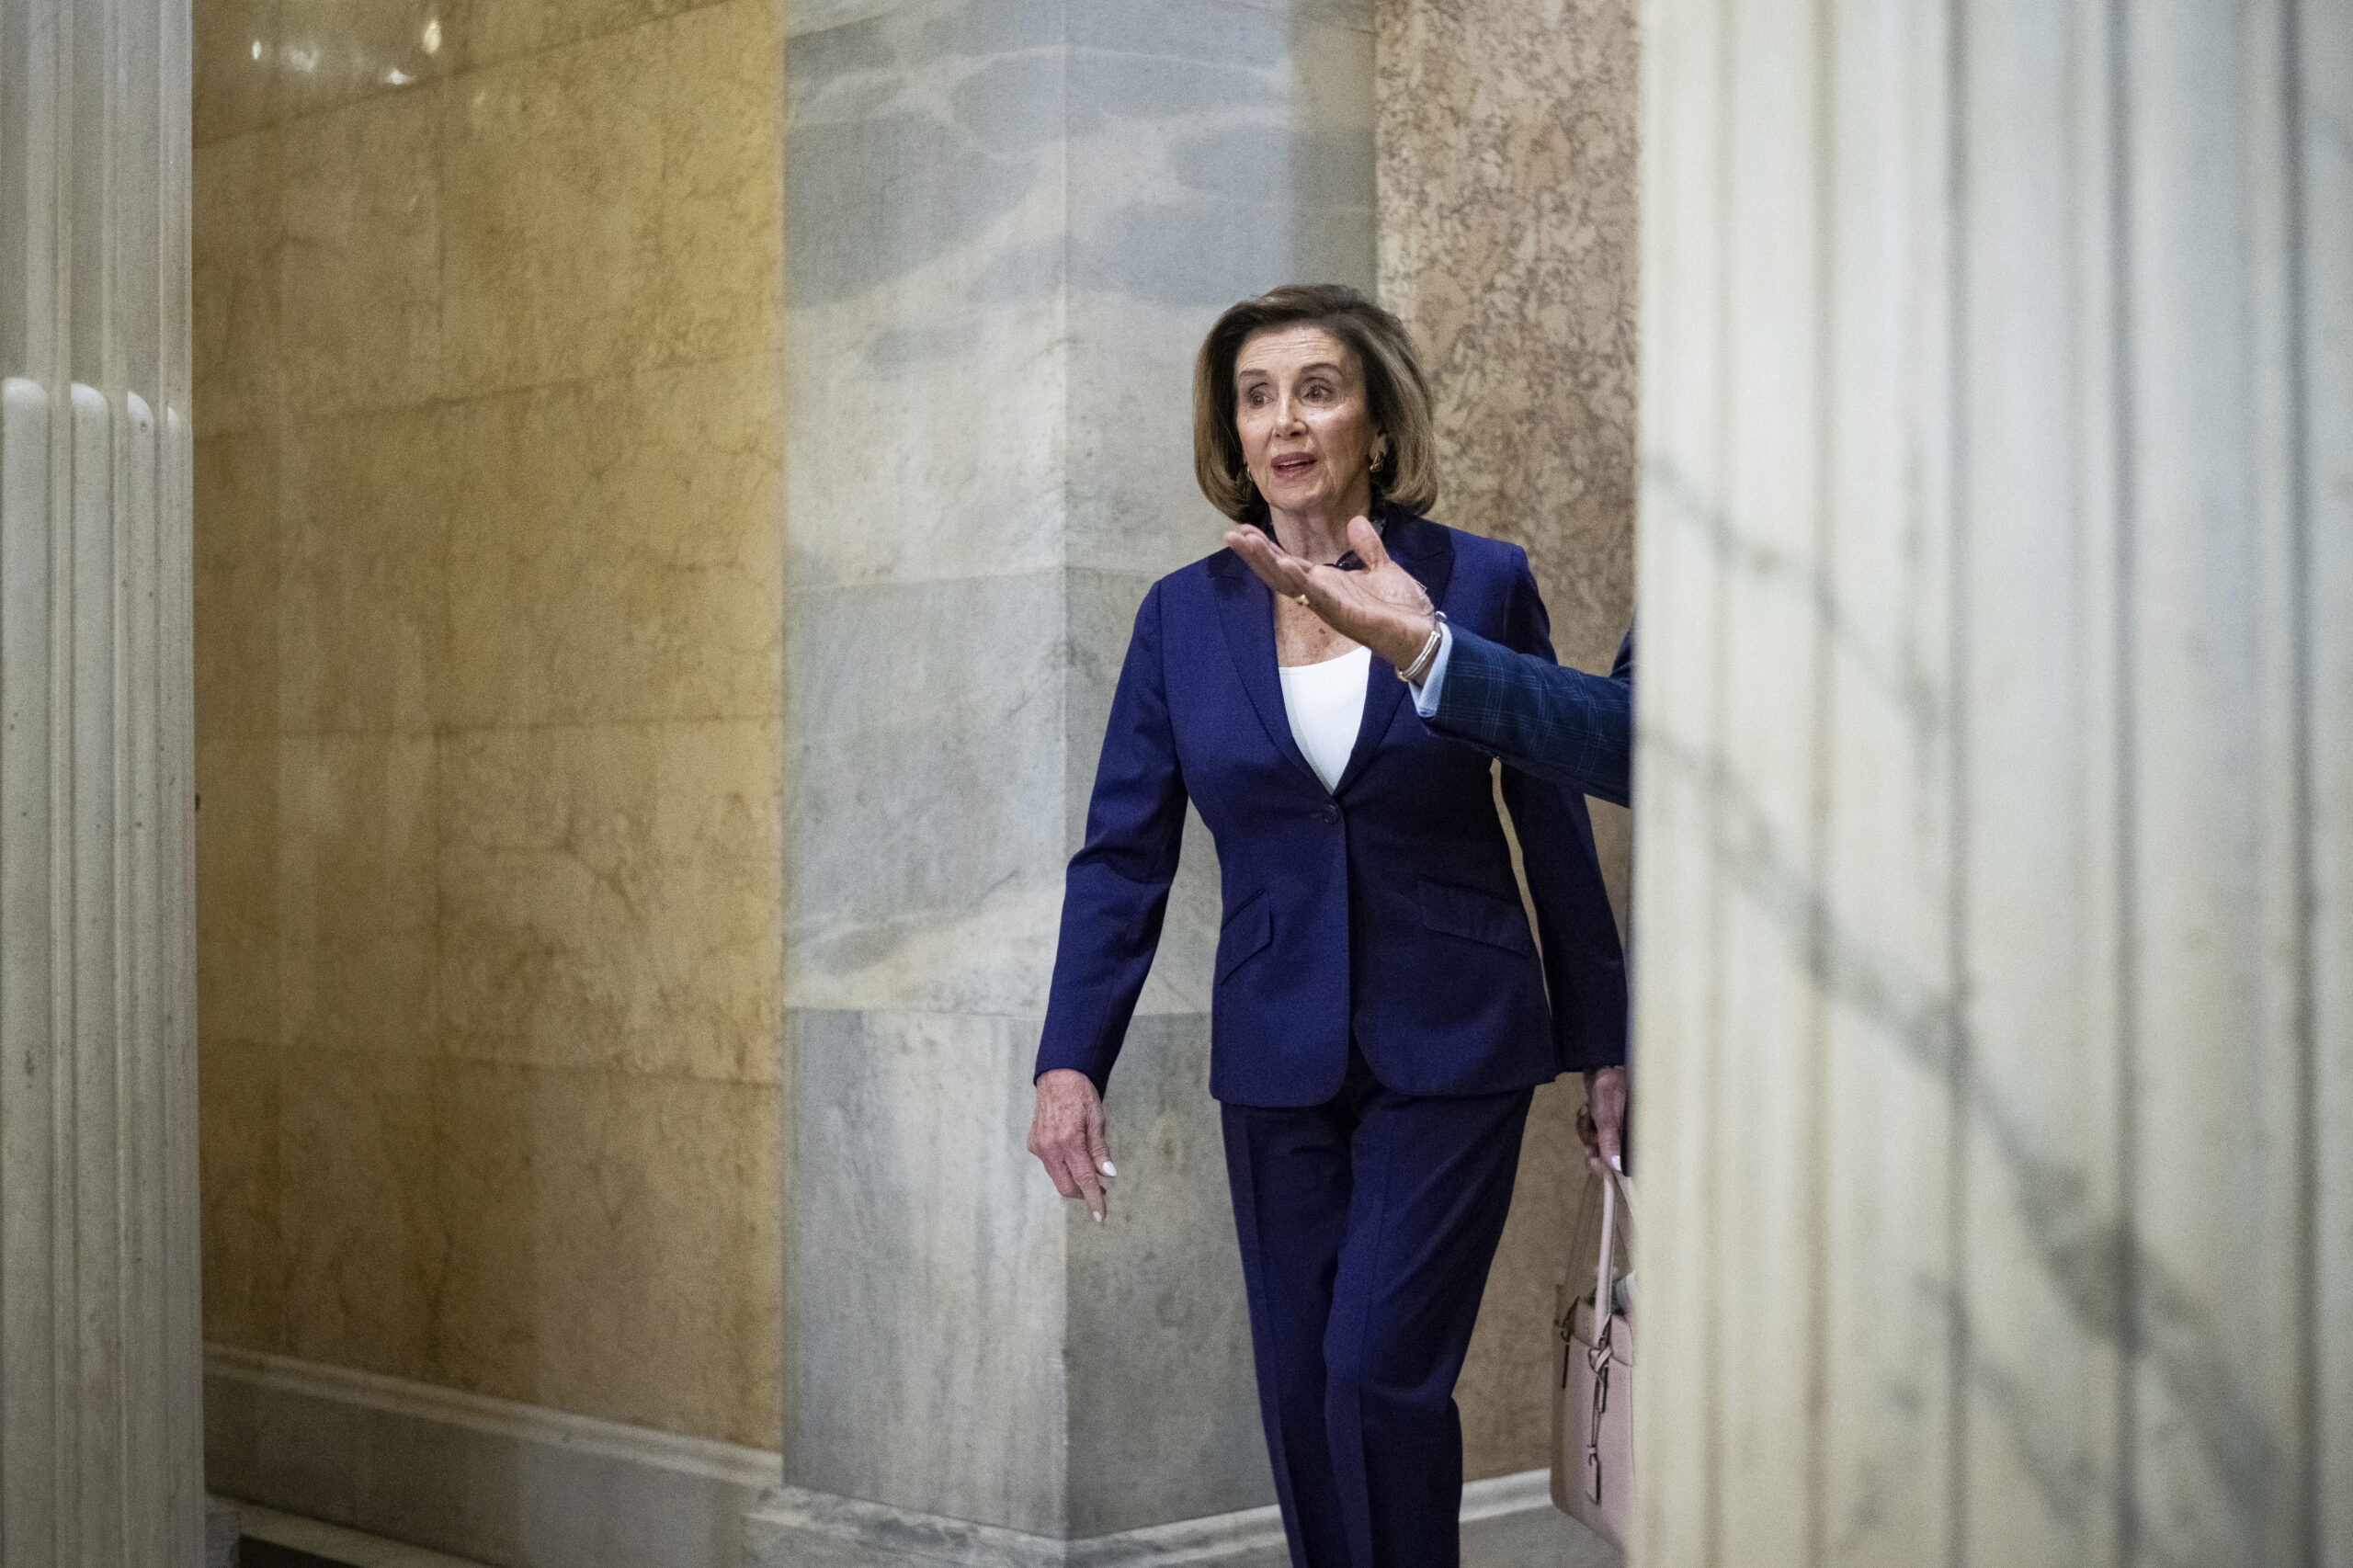 Acting Speaker Orders Pelosi To Vacate Her Office: ‘The Room Will Be Re ...